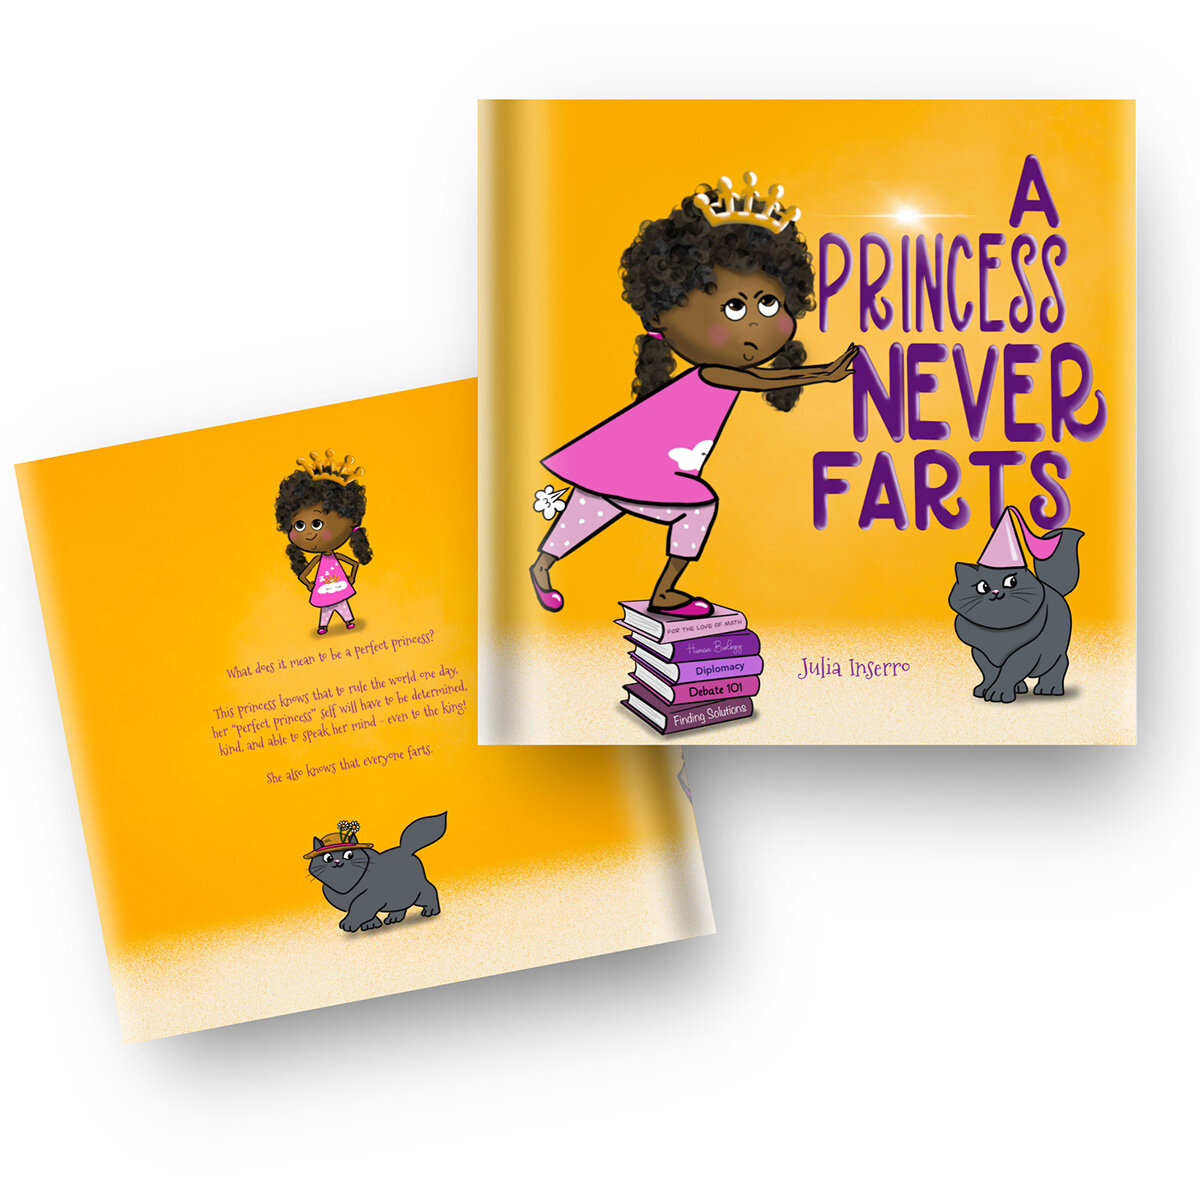 In “A Princess Never Farts,” author Julia Inserro reinforces the idea that all people, including children, should be treated well.